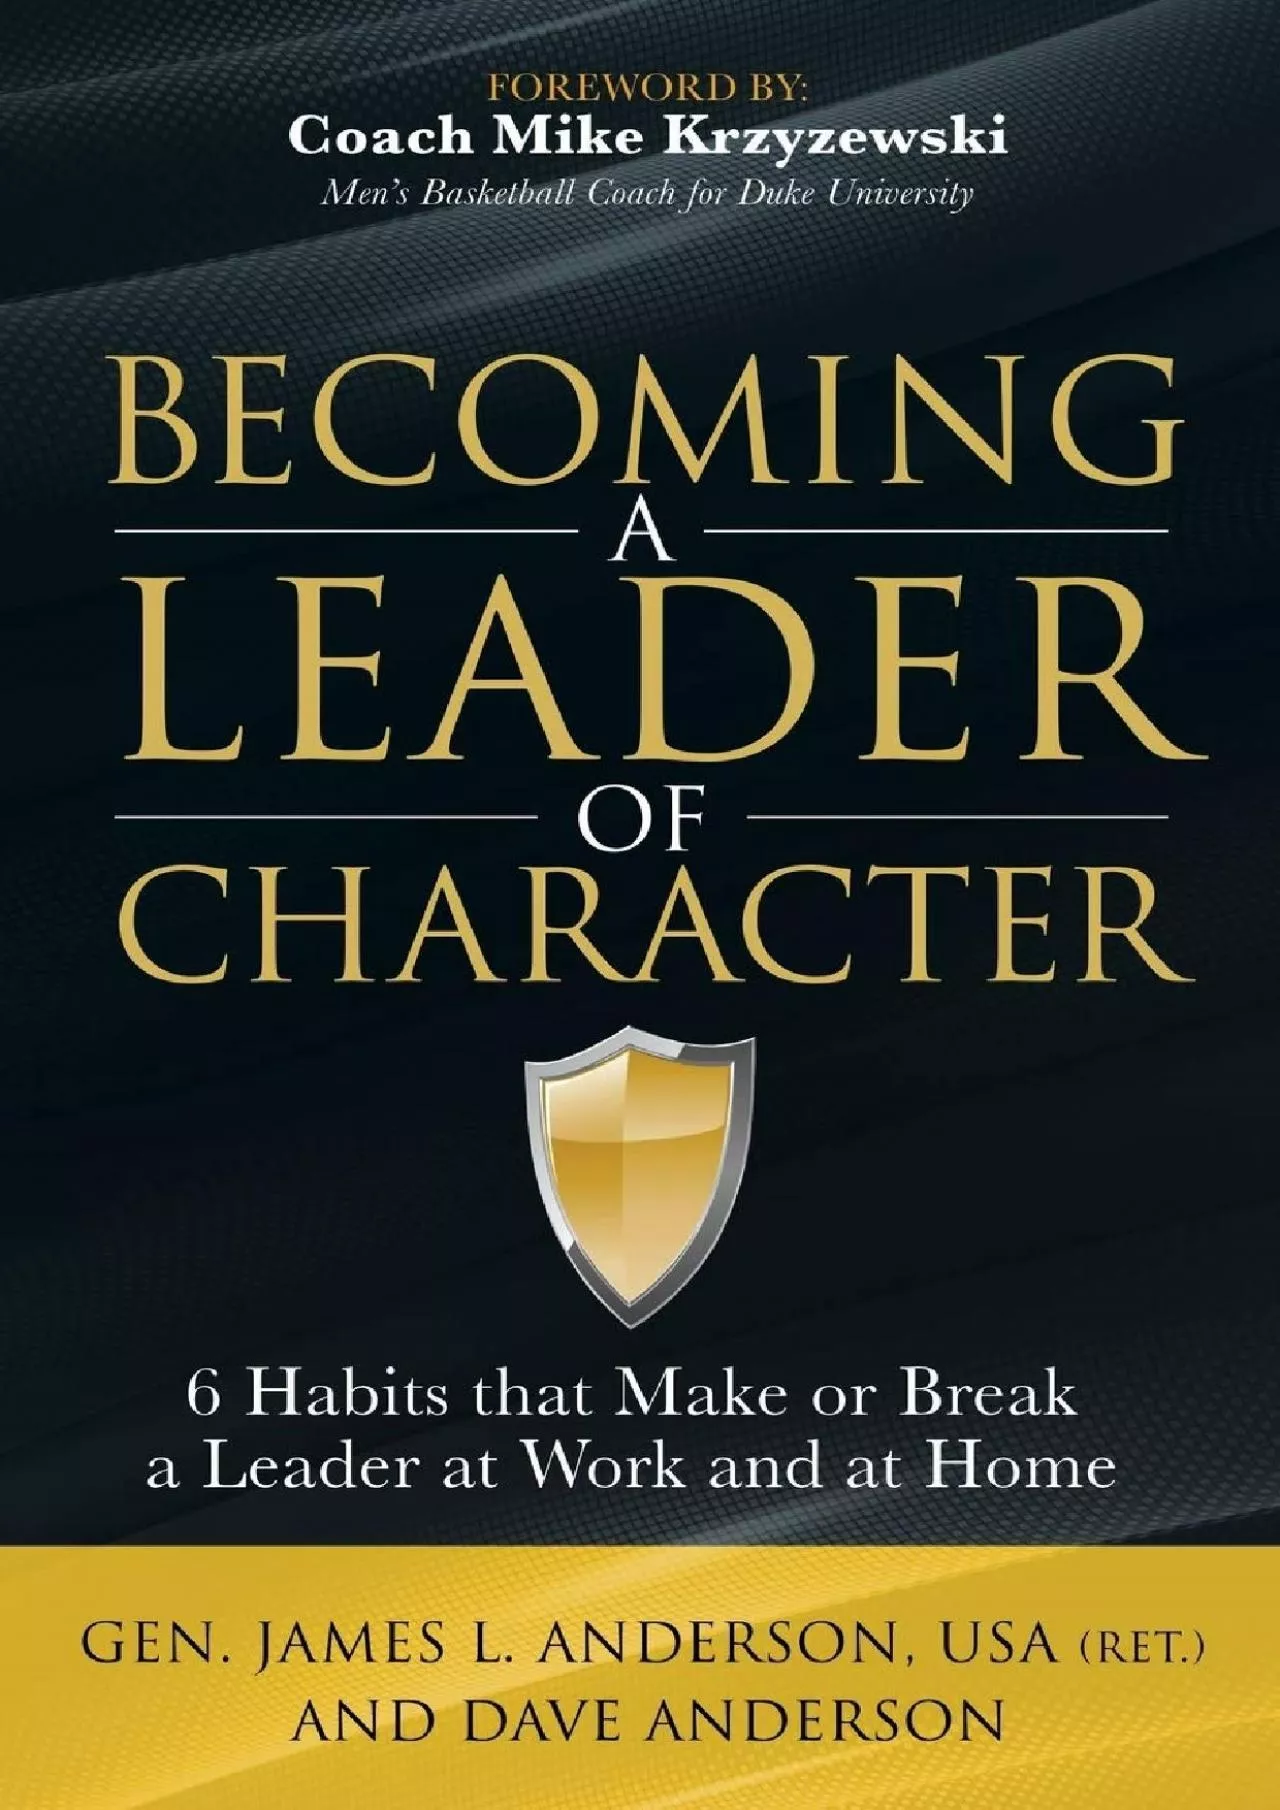 (BOOS)-Becoming a Leader of Character: 6 Habits That Make or Break a Leader at Work and